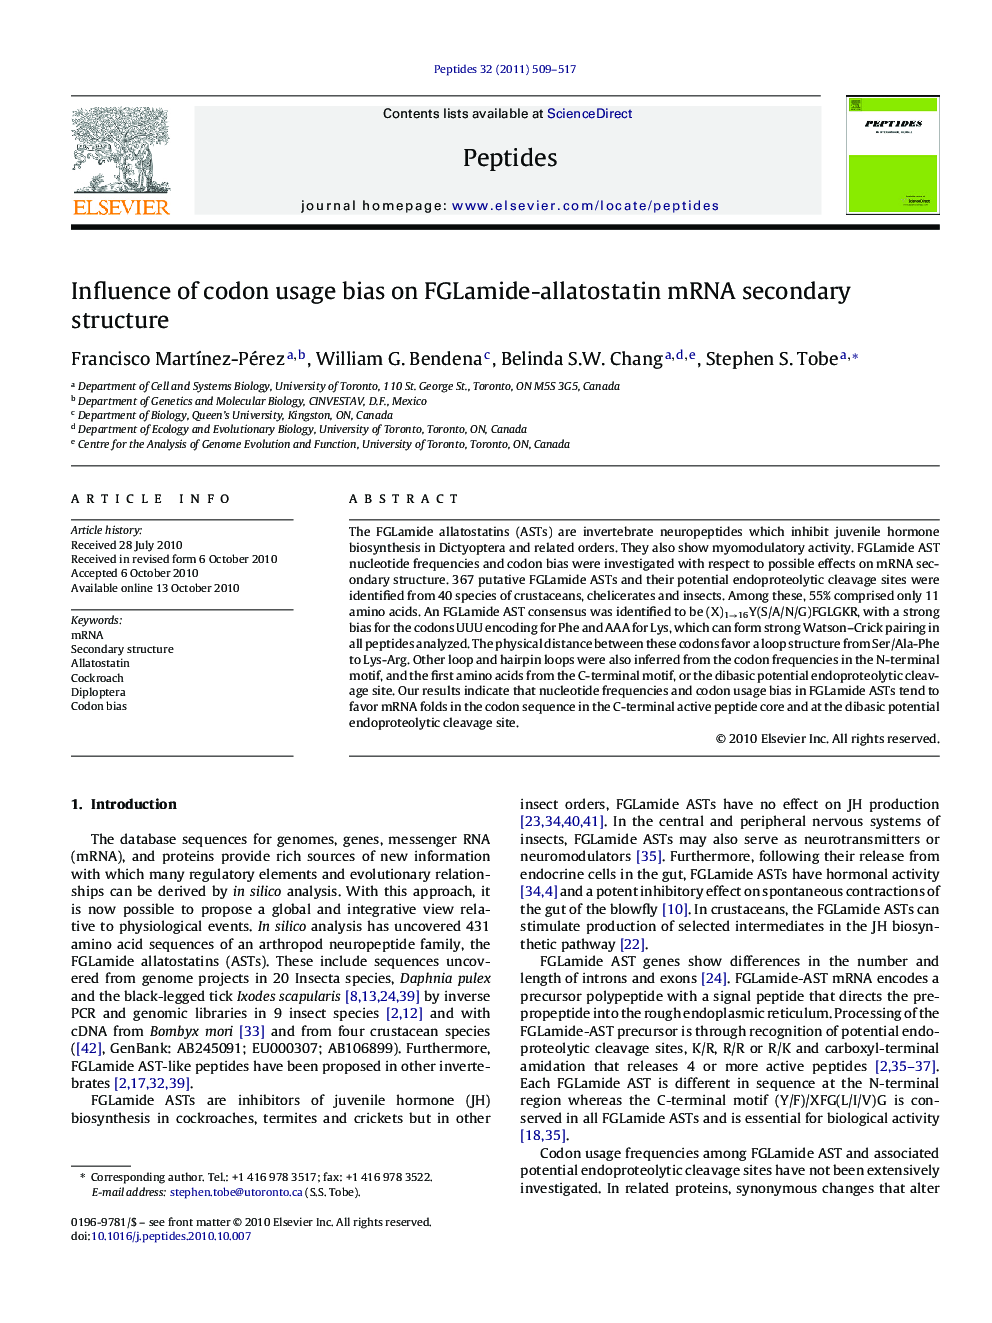 Influence of codon usage bias on FGLamide-allatostatin mRNA secondary structure